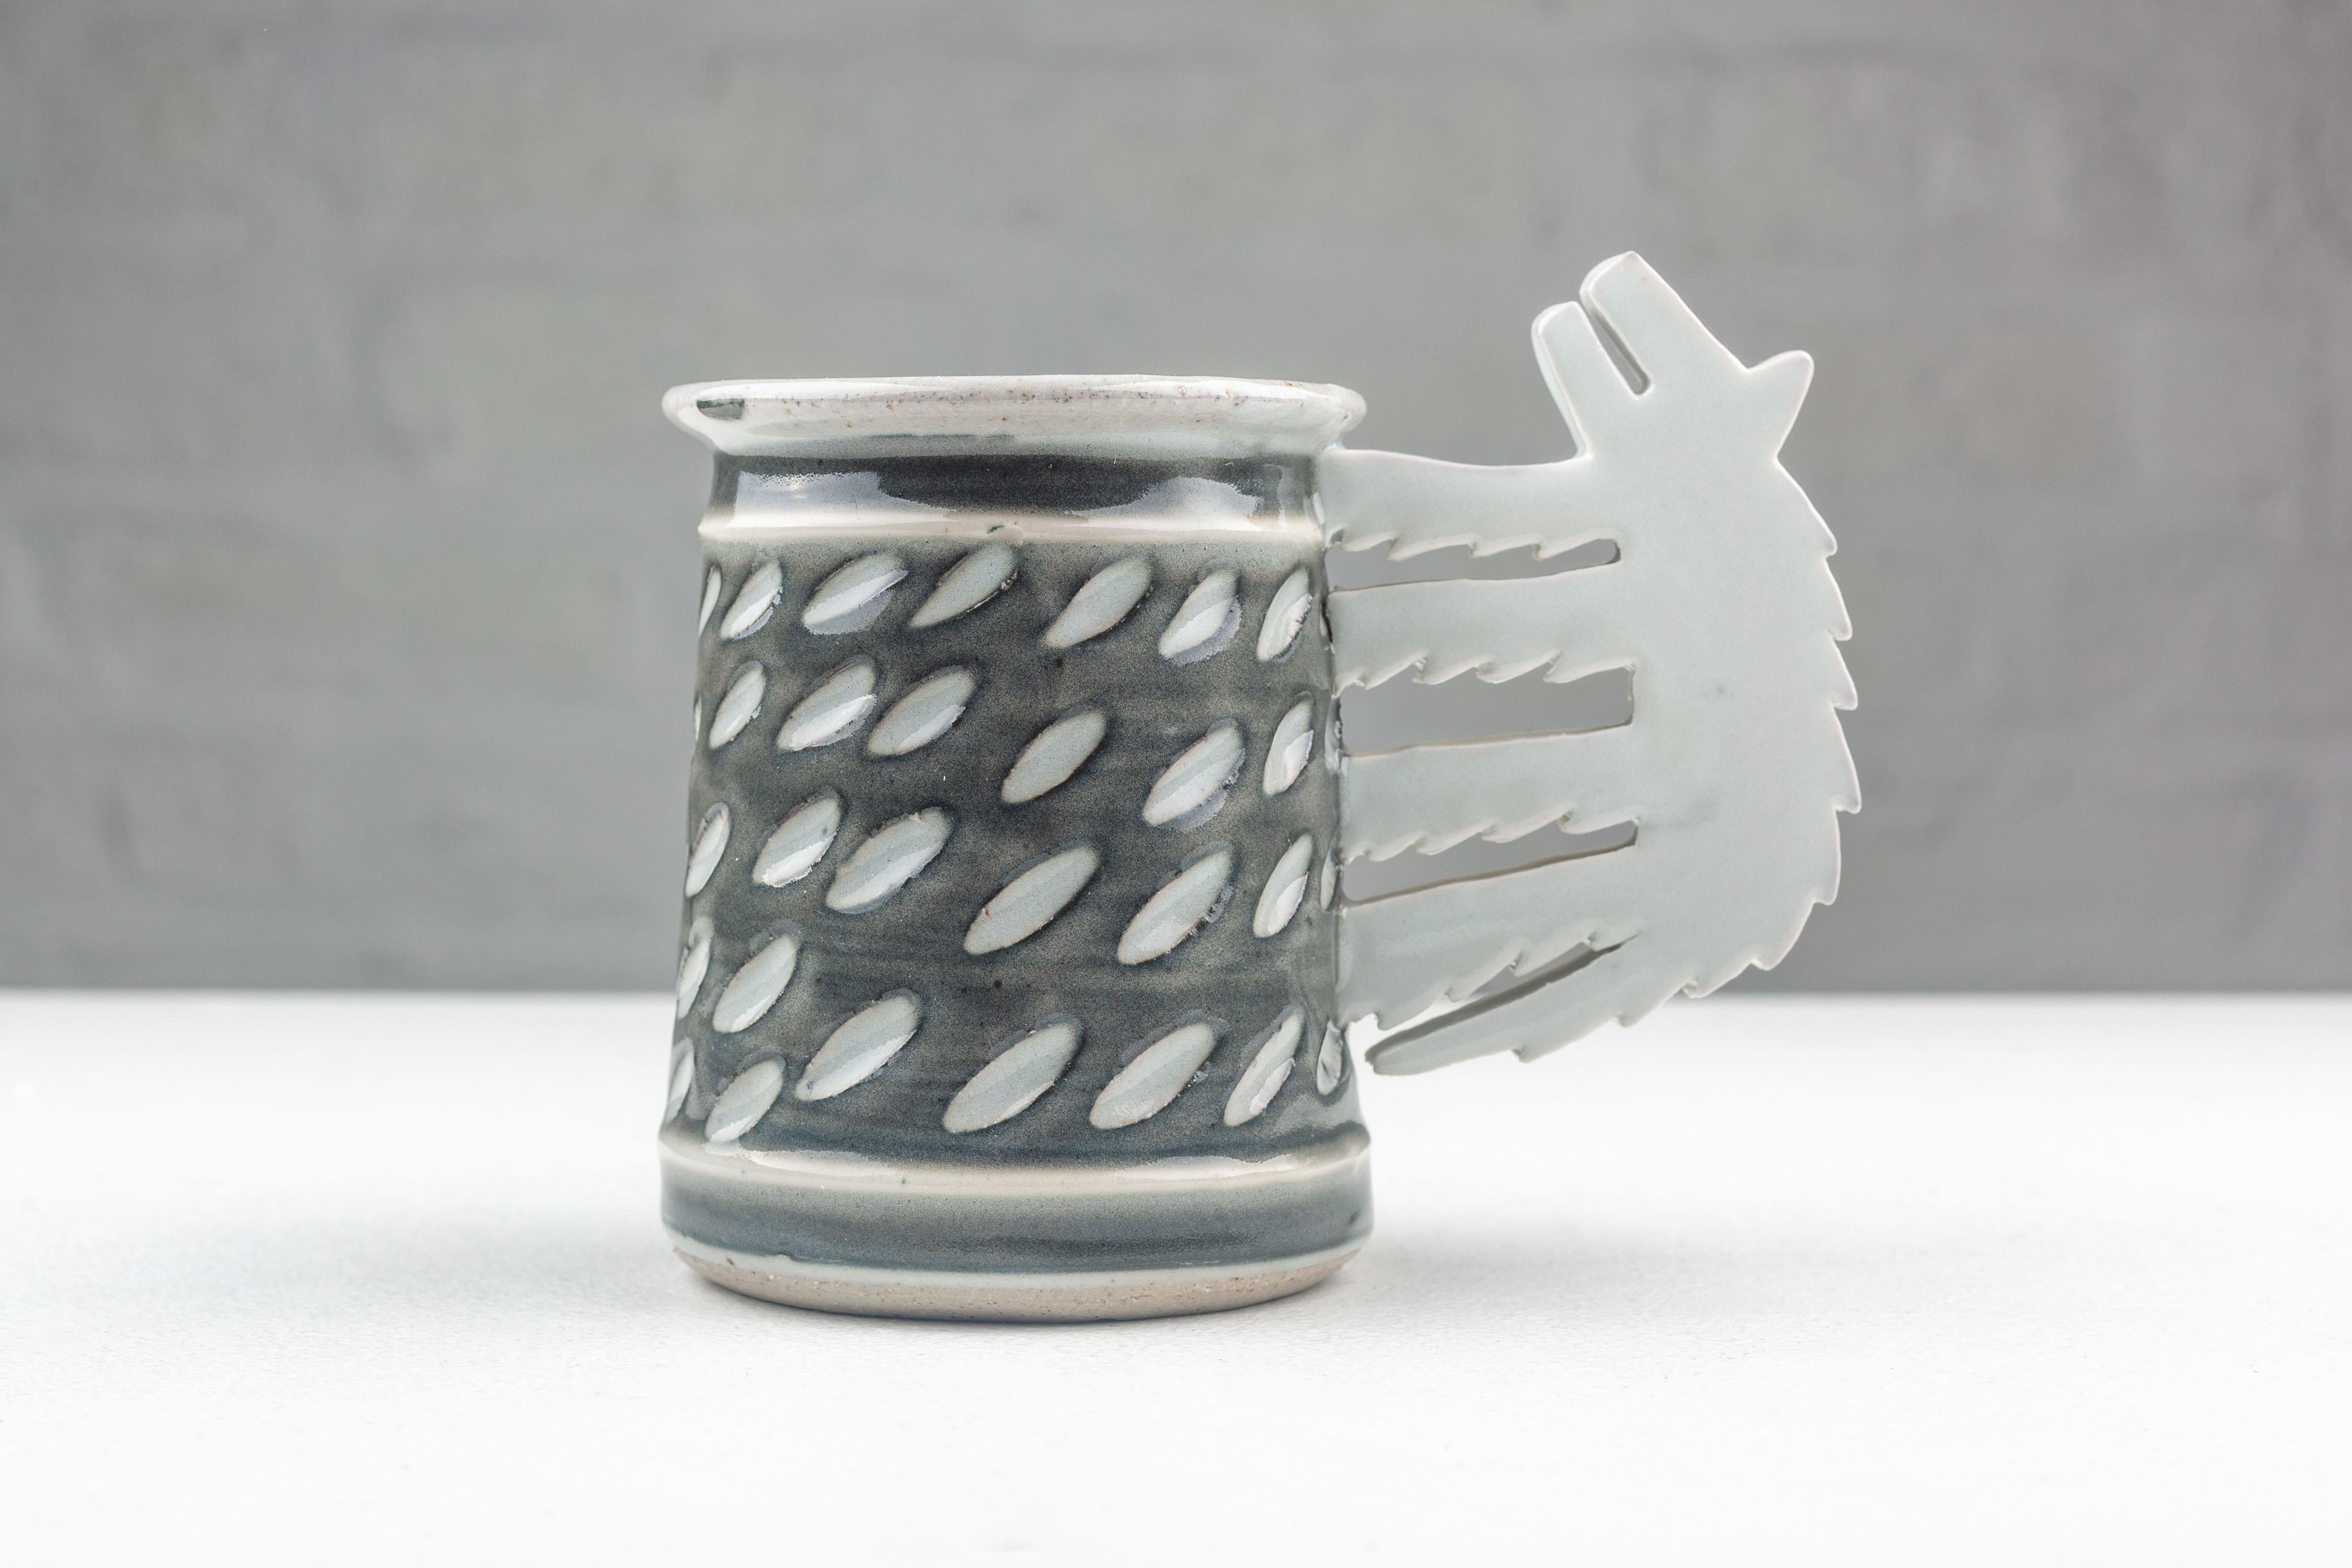 Crafted with a post-modern sensibility, this American Studio Pottery mug is the creation of Steve and Miky Cunningham, made by hand in their Iowa workshop in 1991. The piece is a study in the fusion of function and whimsy, as utilitarian form meets